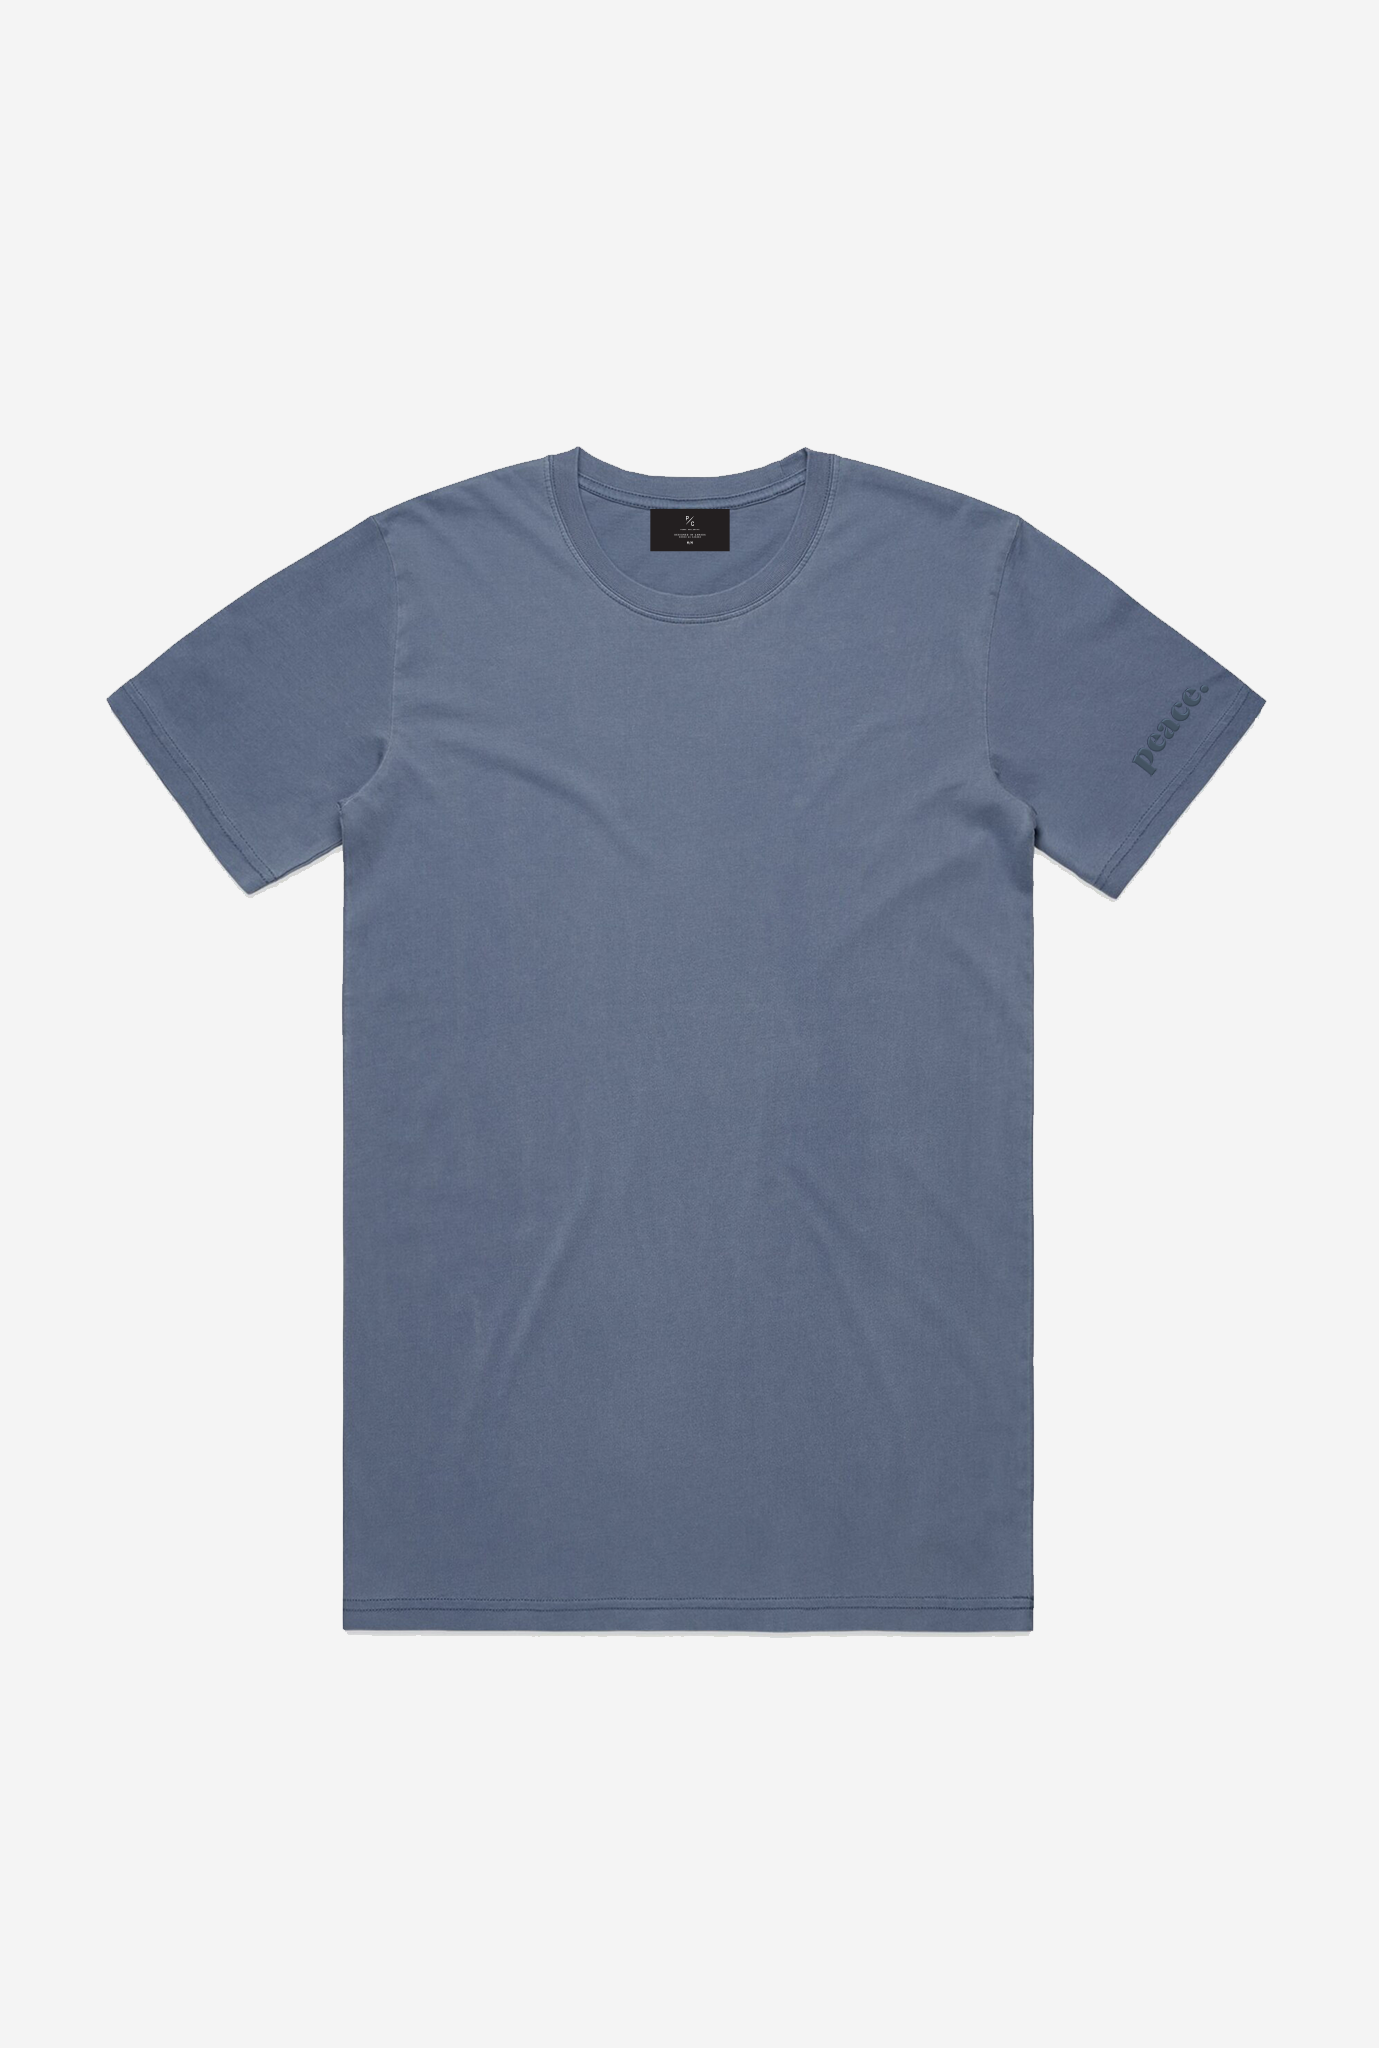 Peace Washed T-Shirt - Faded Blue